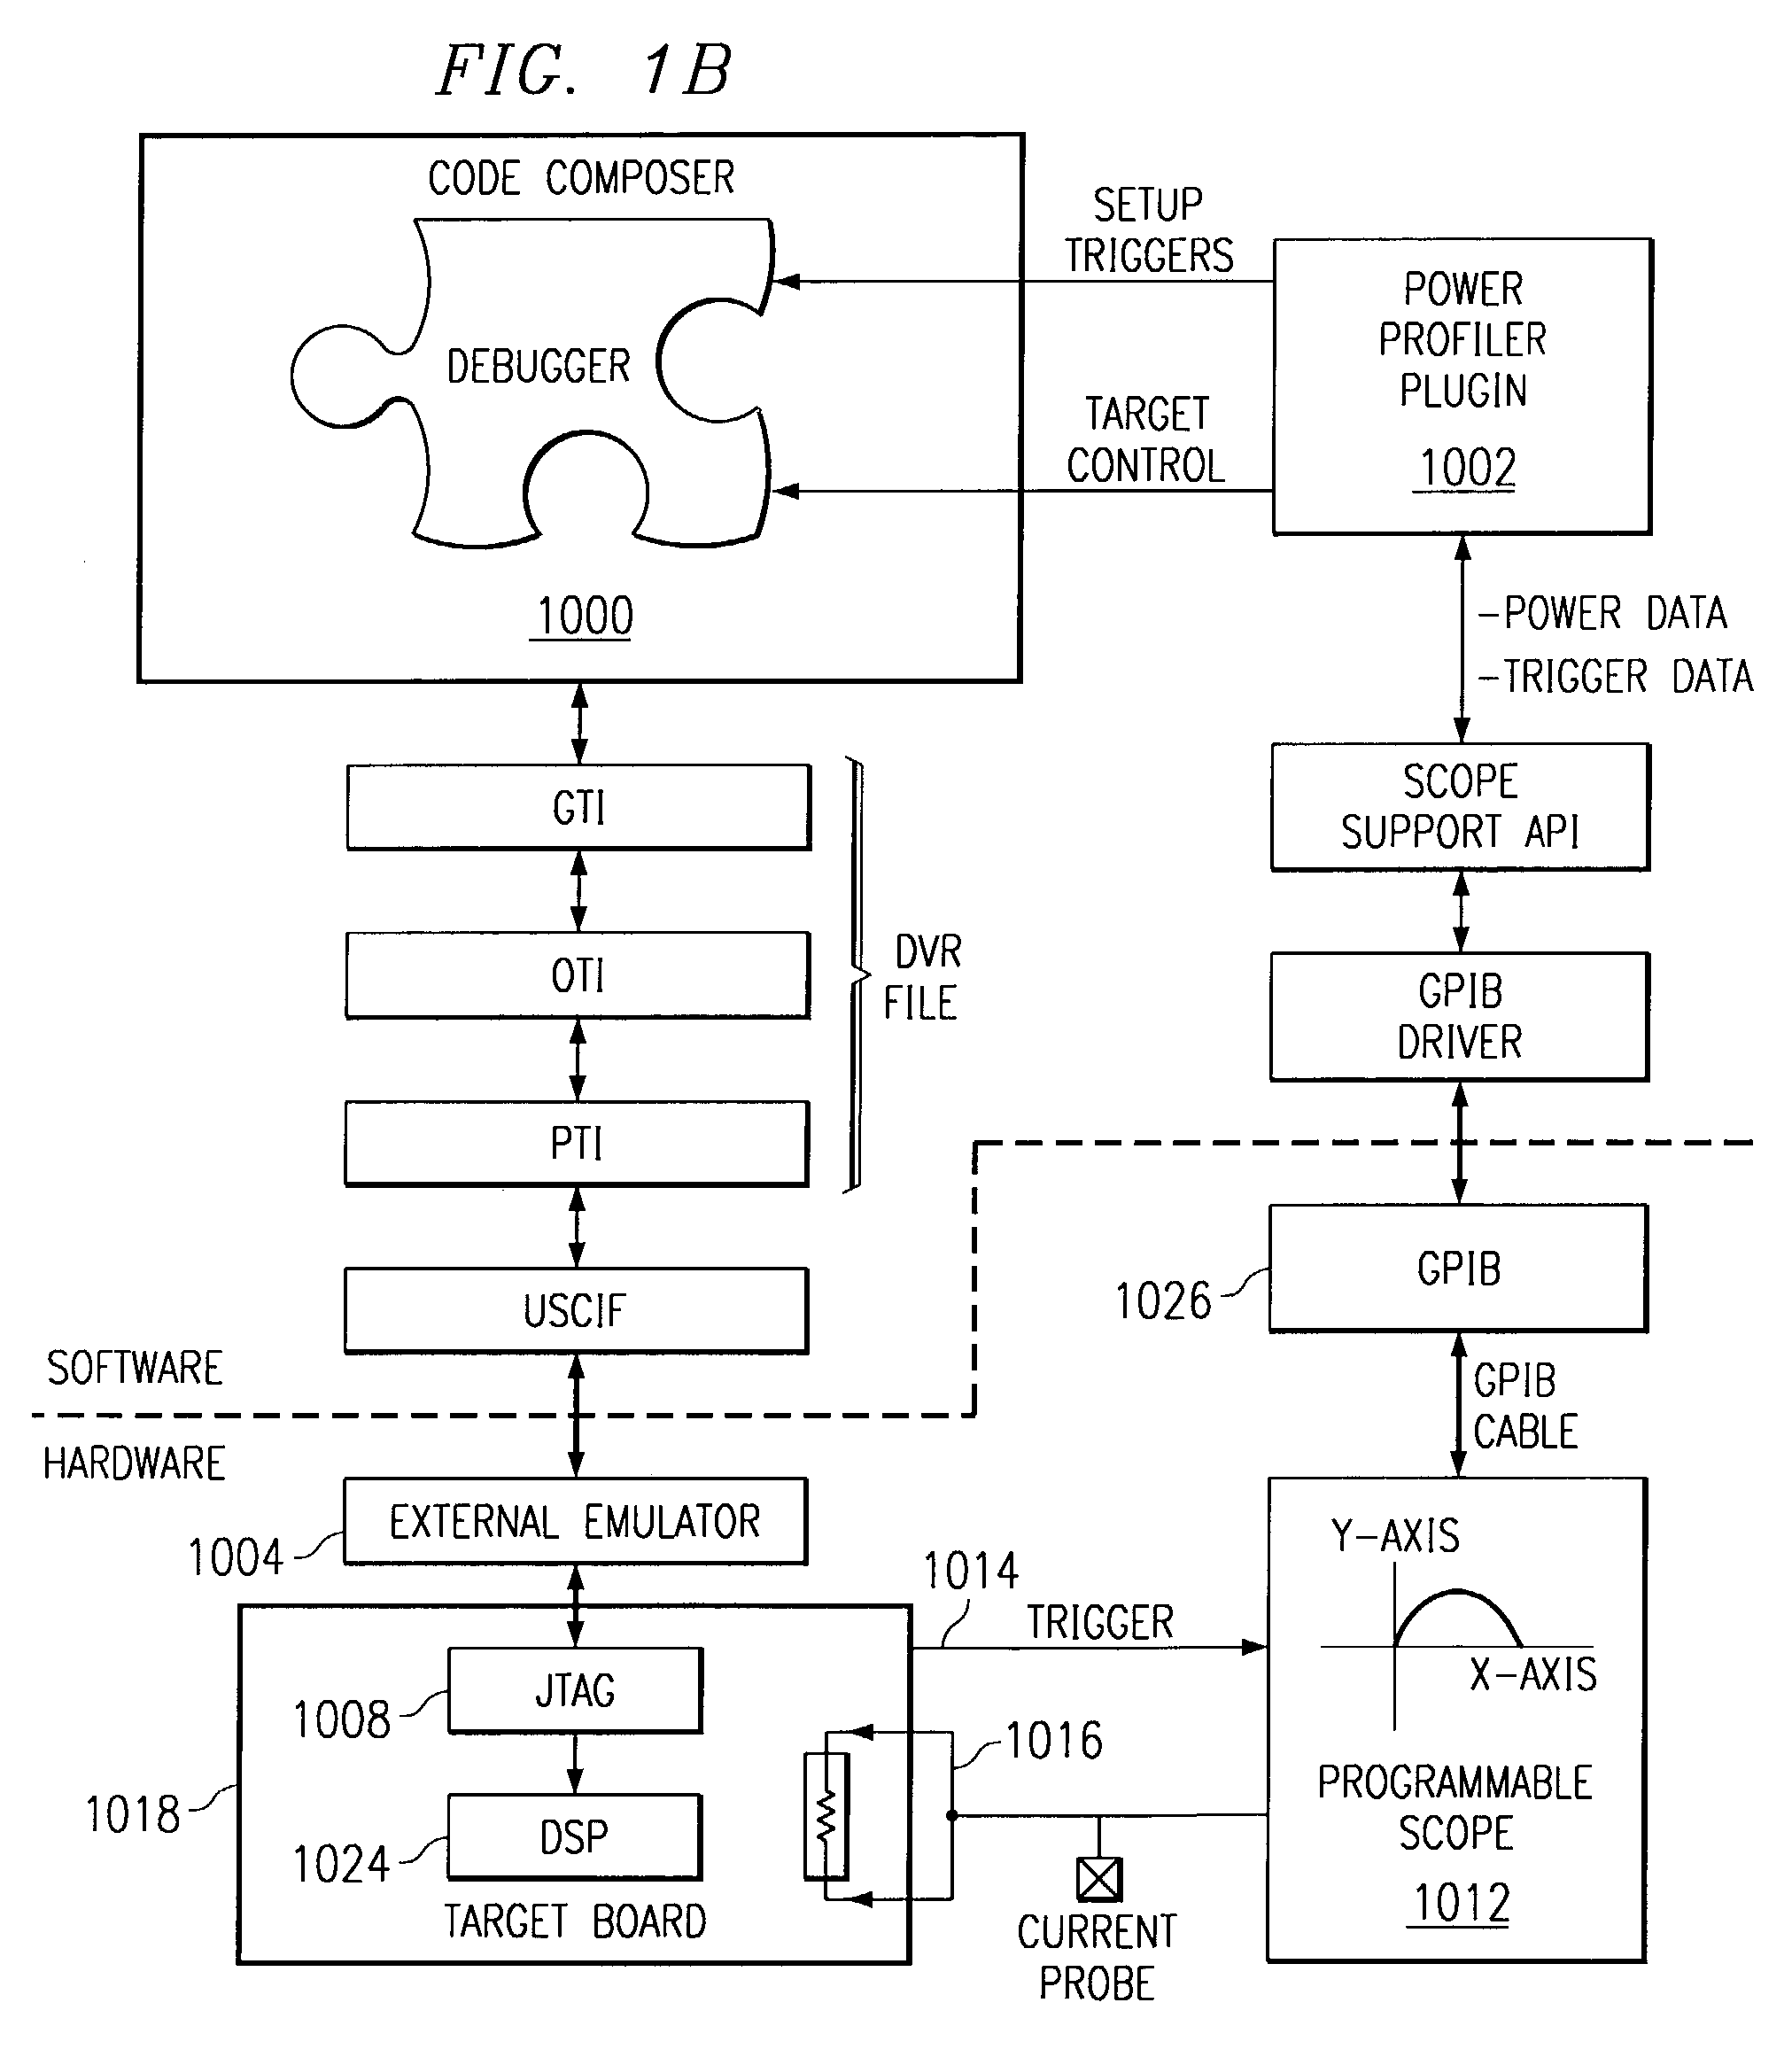 System and method for power profiling of tasks